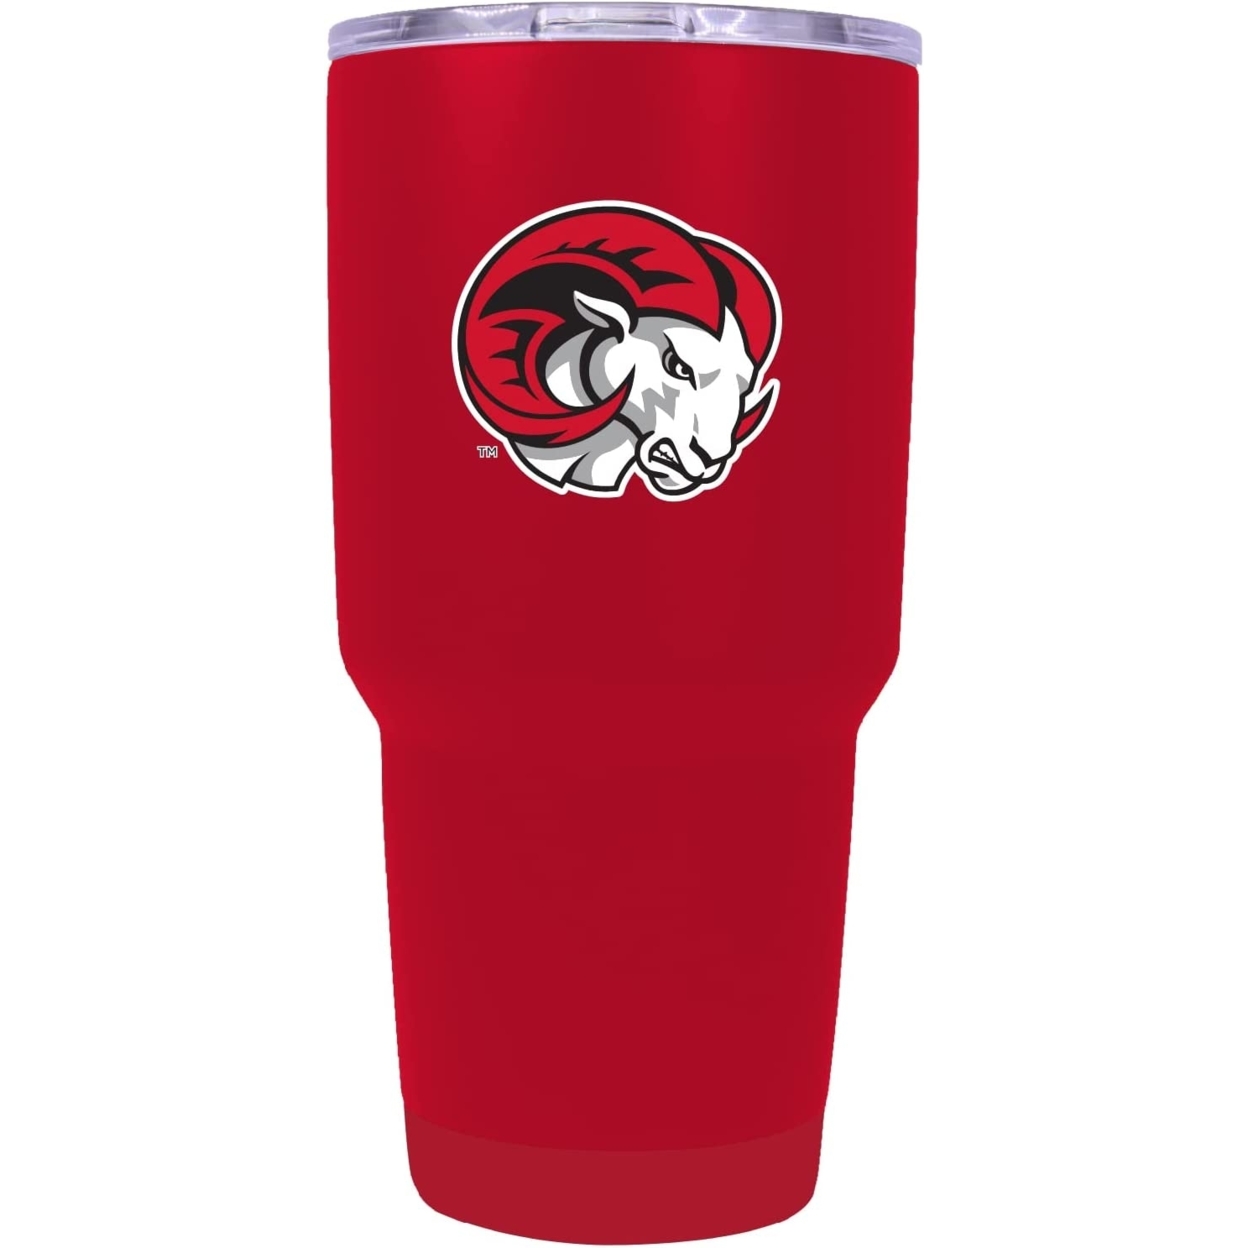 Winston-Salem State 24 Oz Insulated Stainless Steel Tumbler Red